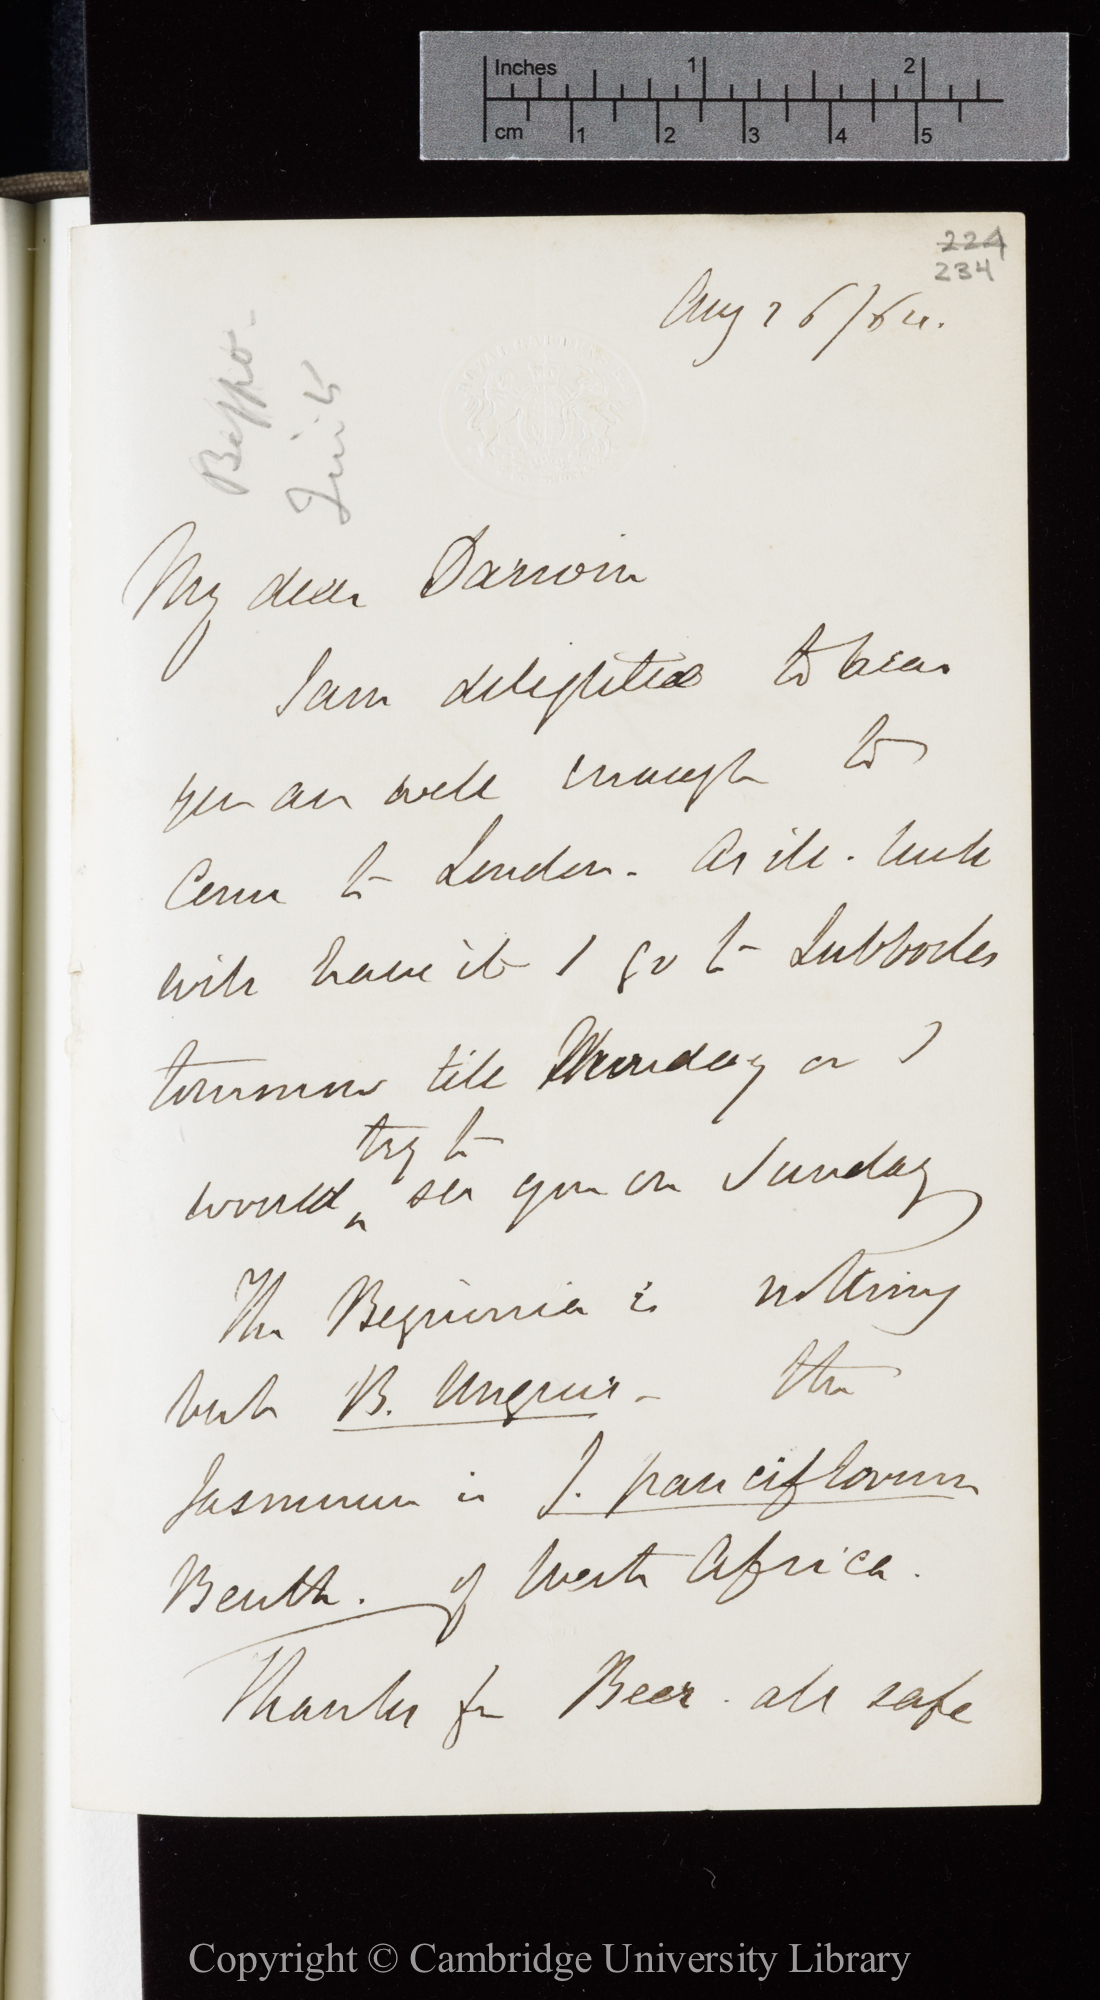 Letter from J. D. Hooker to C. R. Darwin   26 August 1864